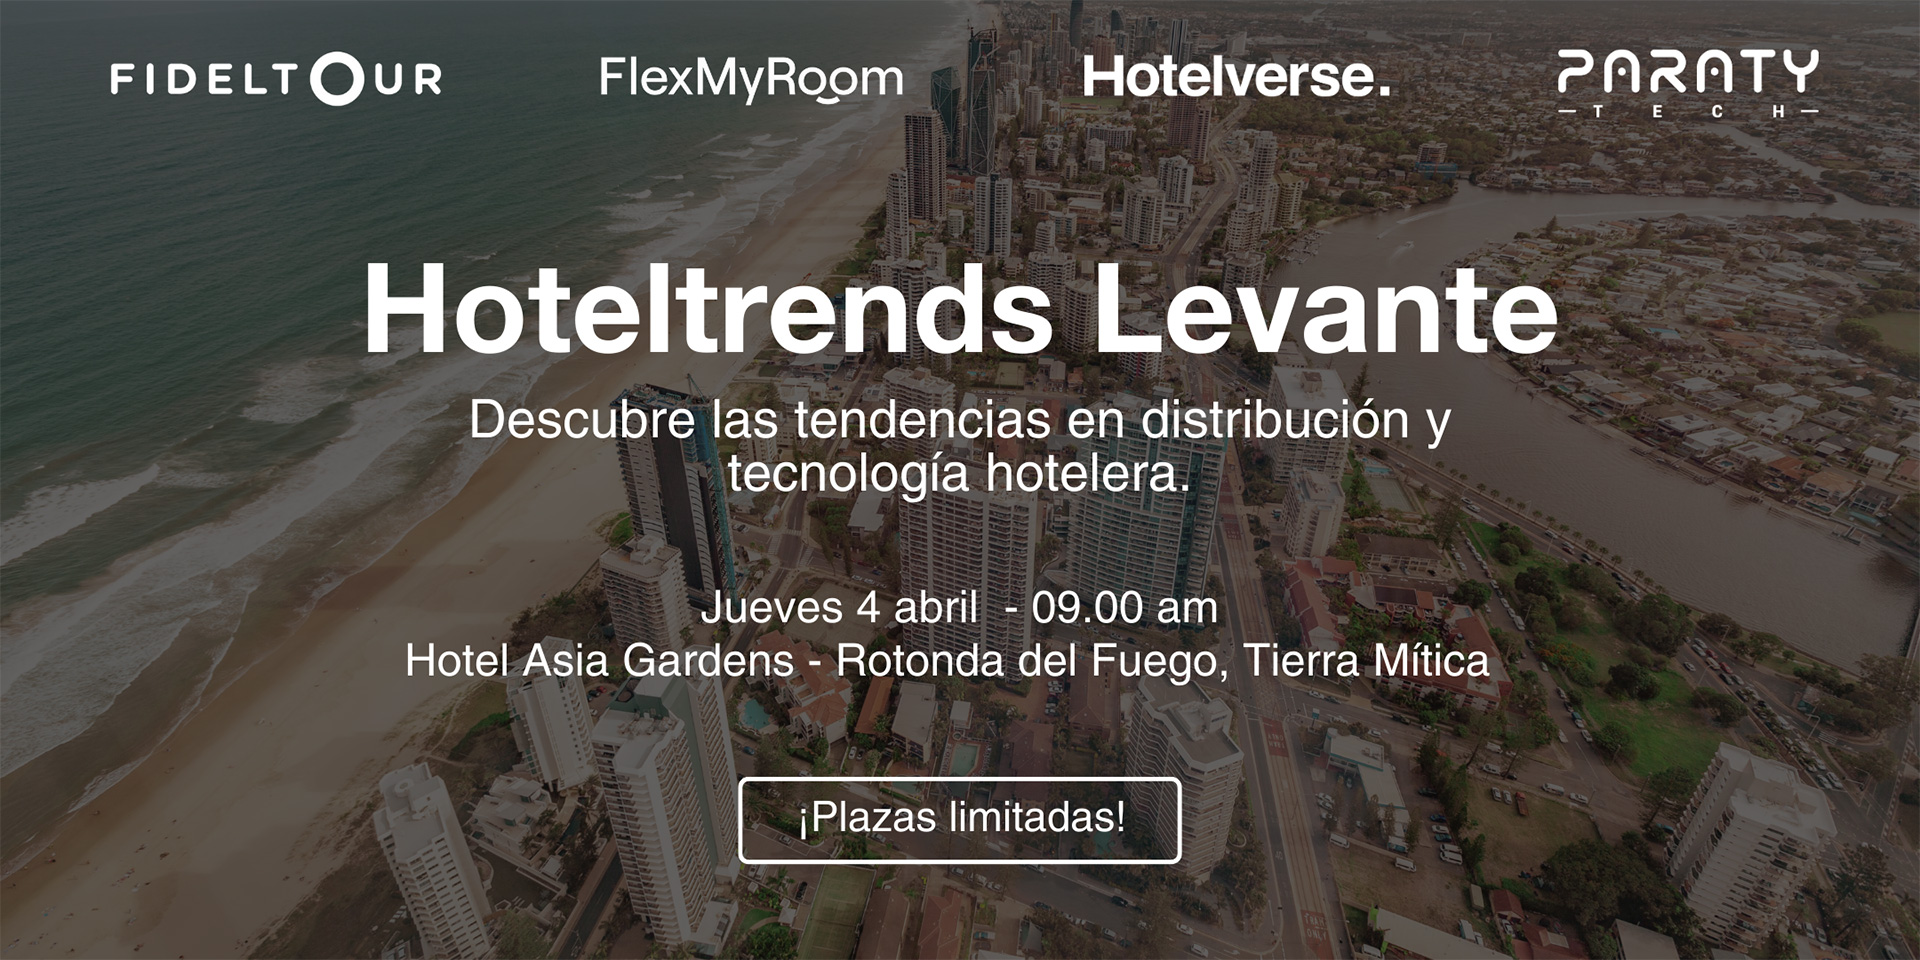 On April 4, at Hoteltrends Levante, hotel distribution and technology come up for discussion